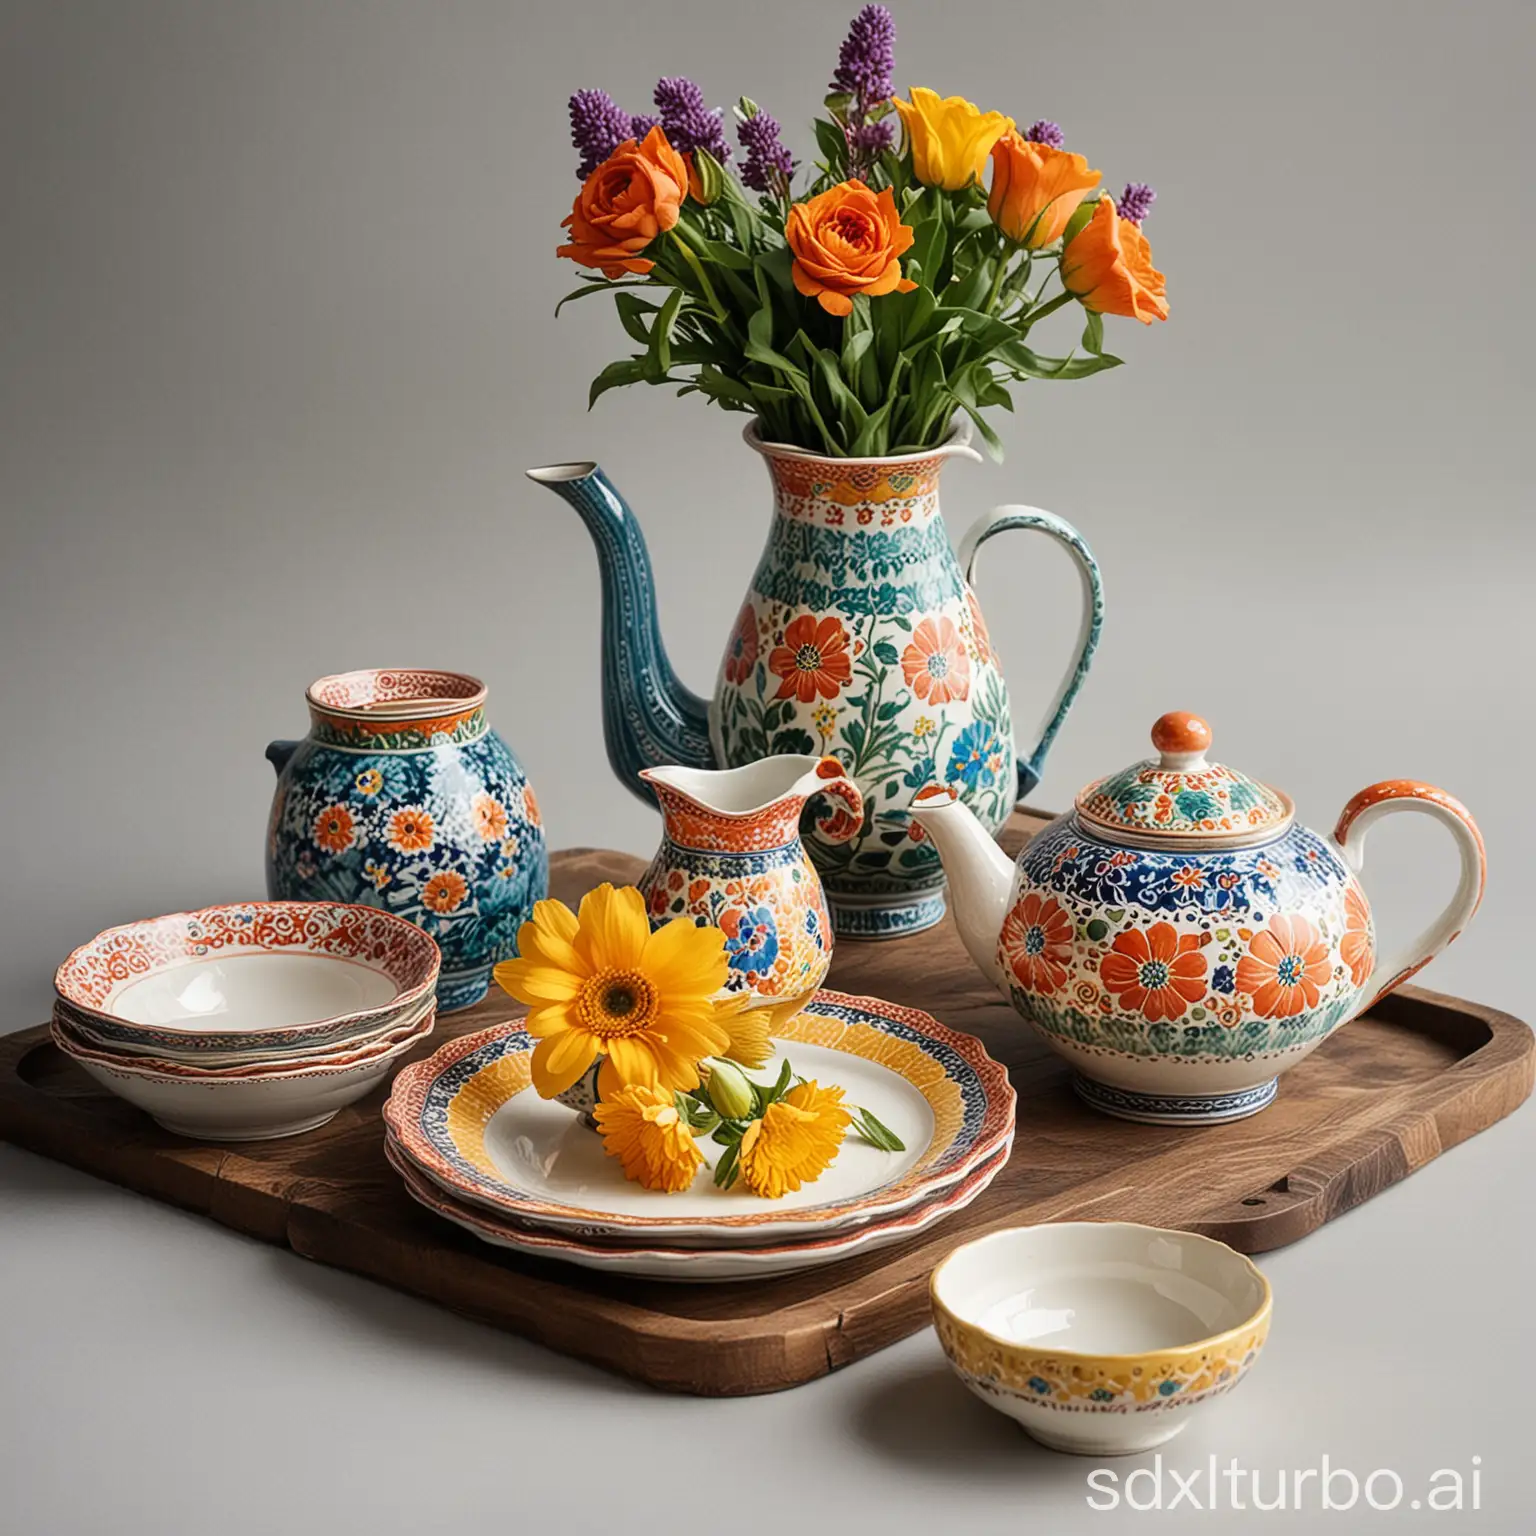 In the middle, there is a set of tableware with patterned edges, a teapot on the left, and a vase on the right, with colorful flowers in the vase.